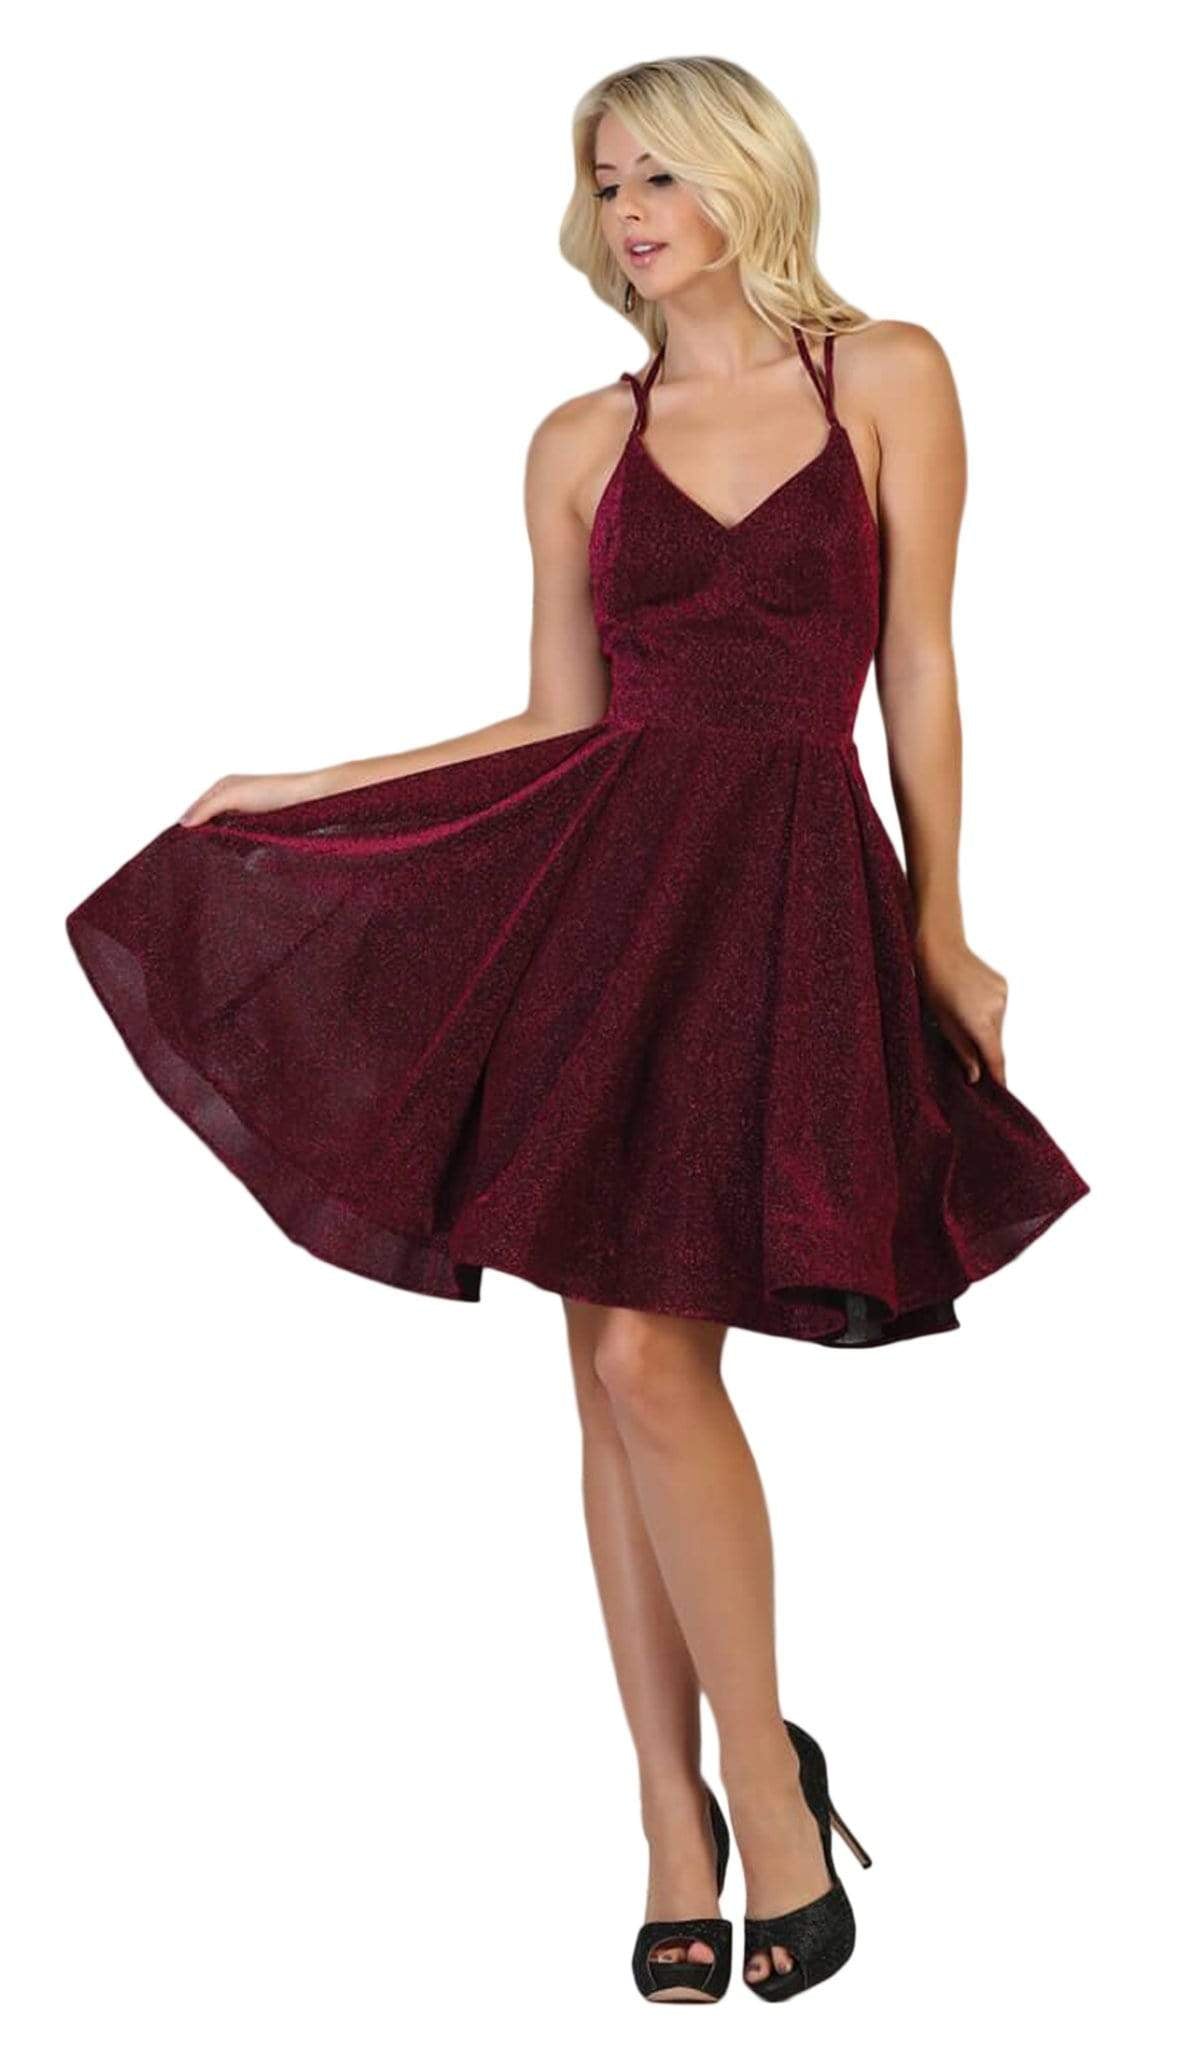 May Queen - RQ7754 Strappy V-Neck Pleated A-Line Dress Cocktail Dresses